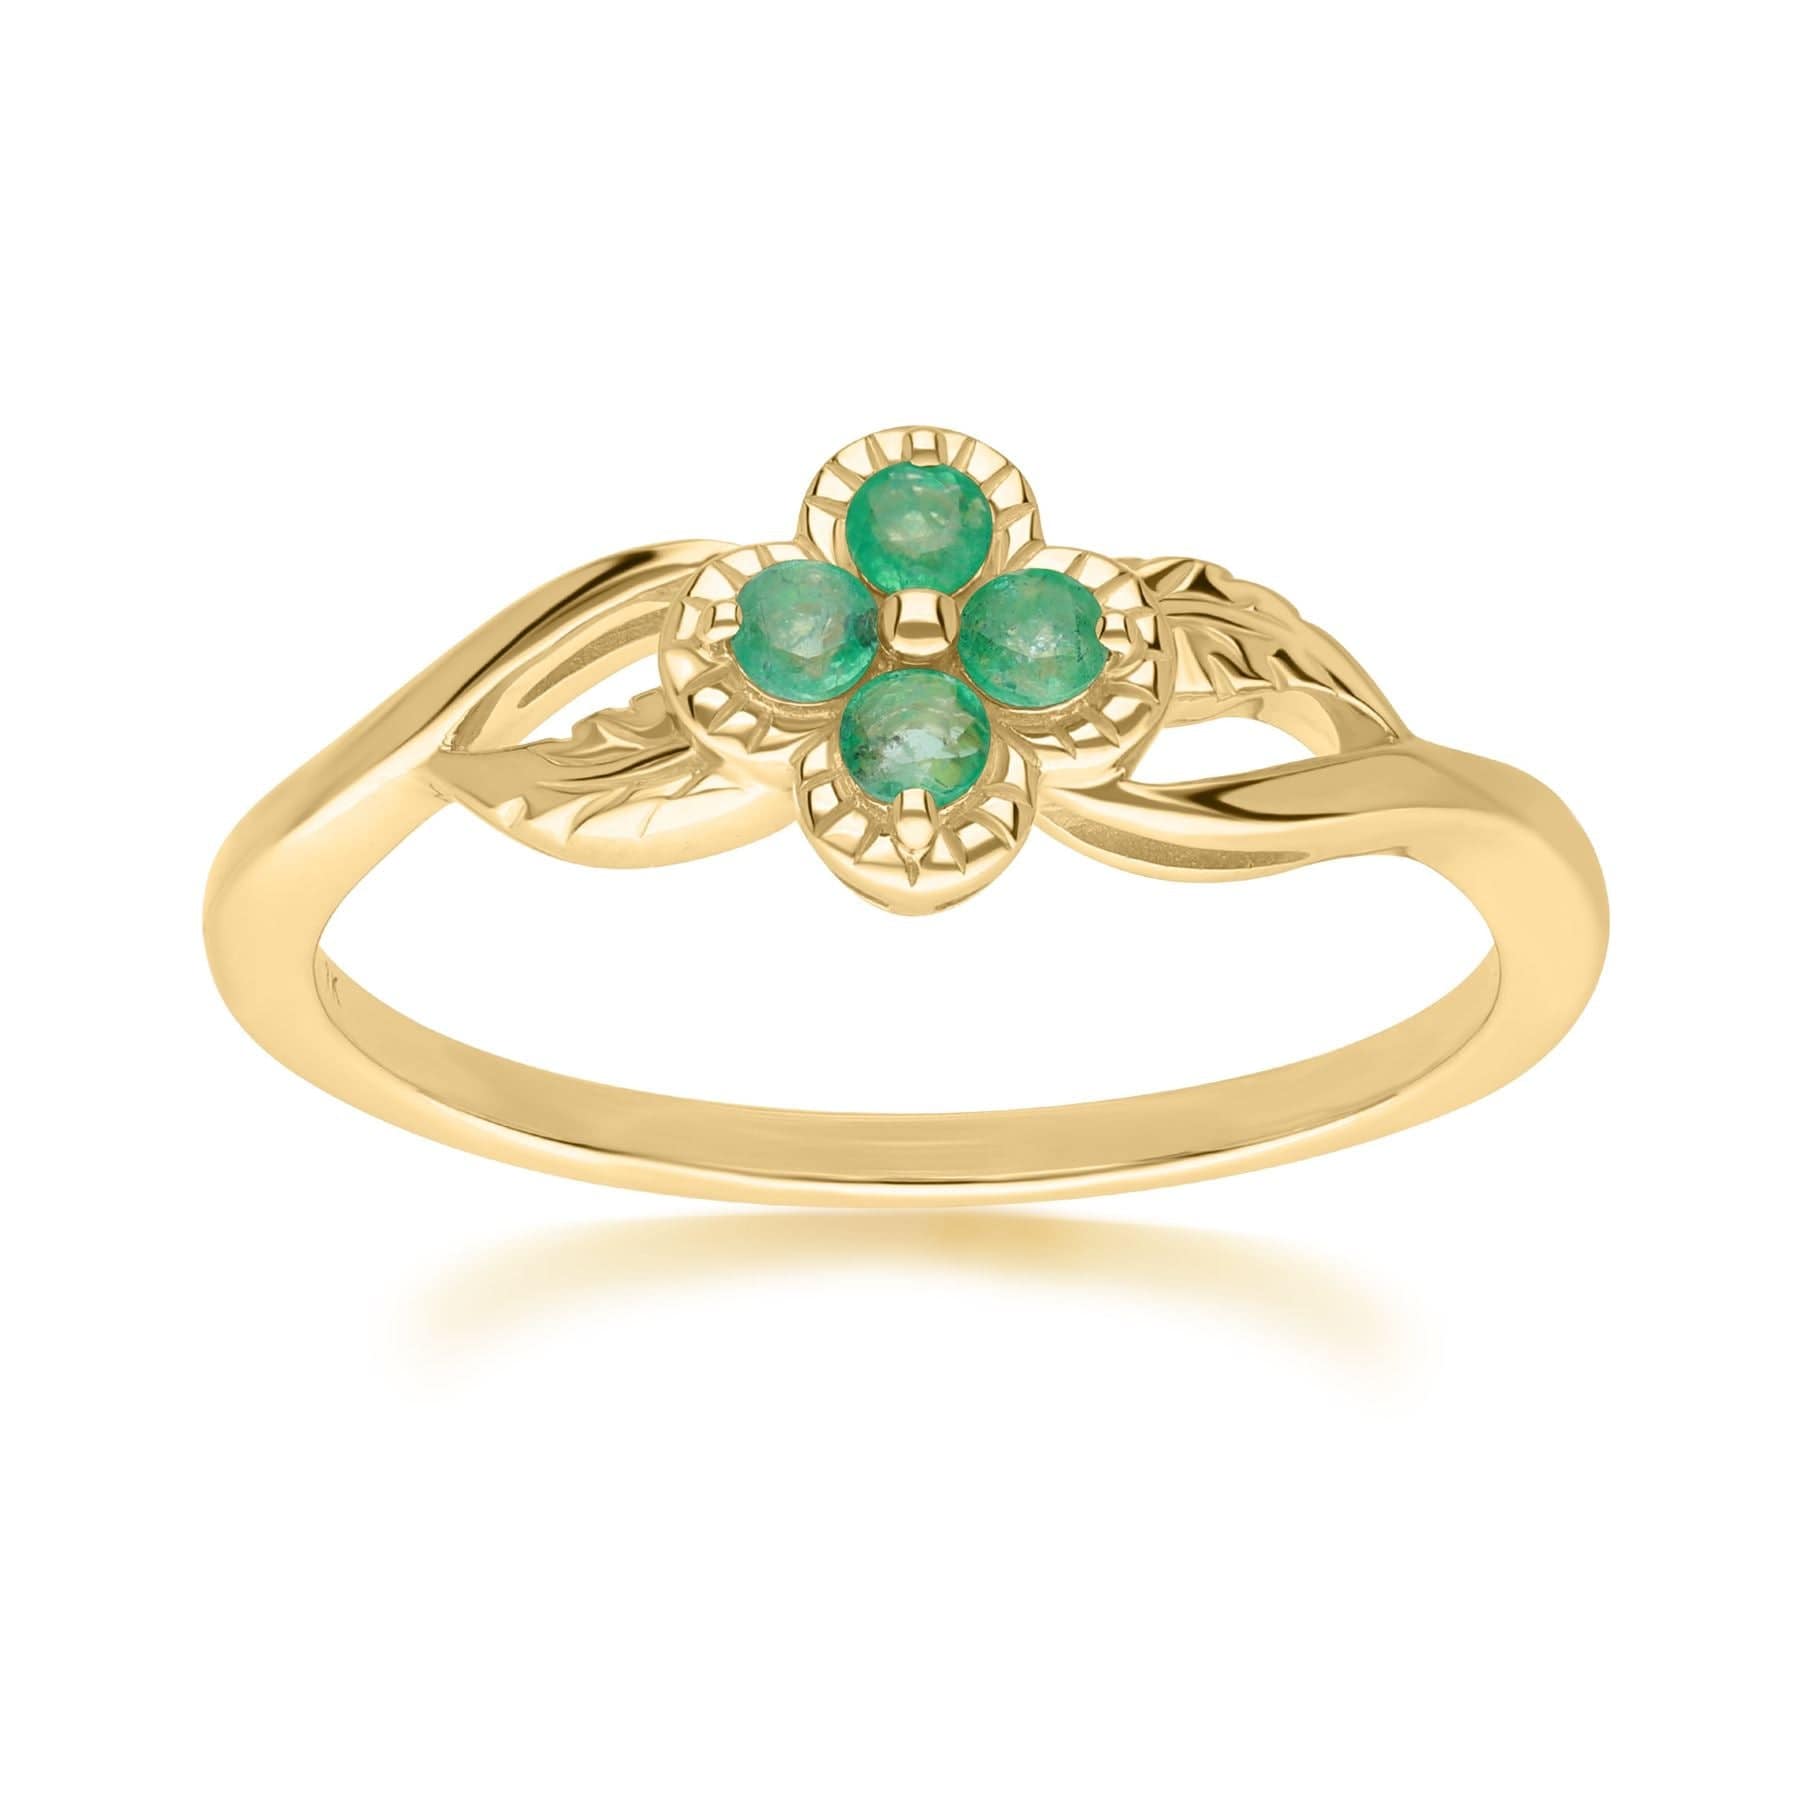 Floral Round Emerald Ring in 9ct Yellow Gold - Gemondo